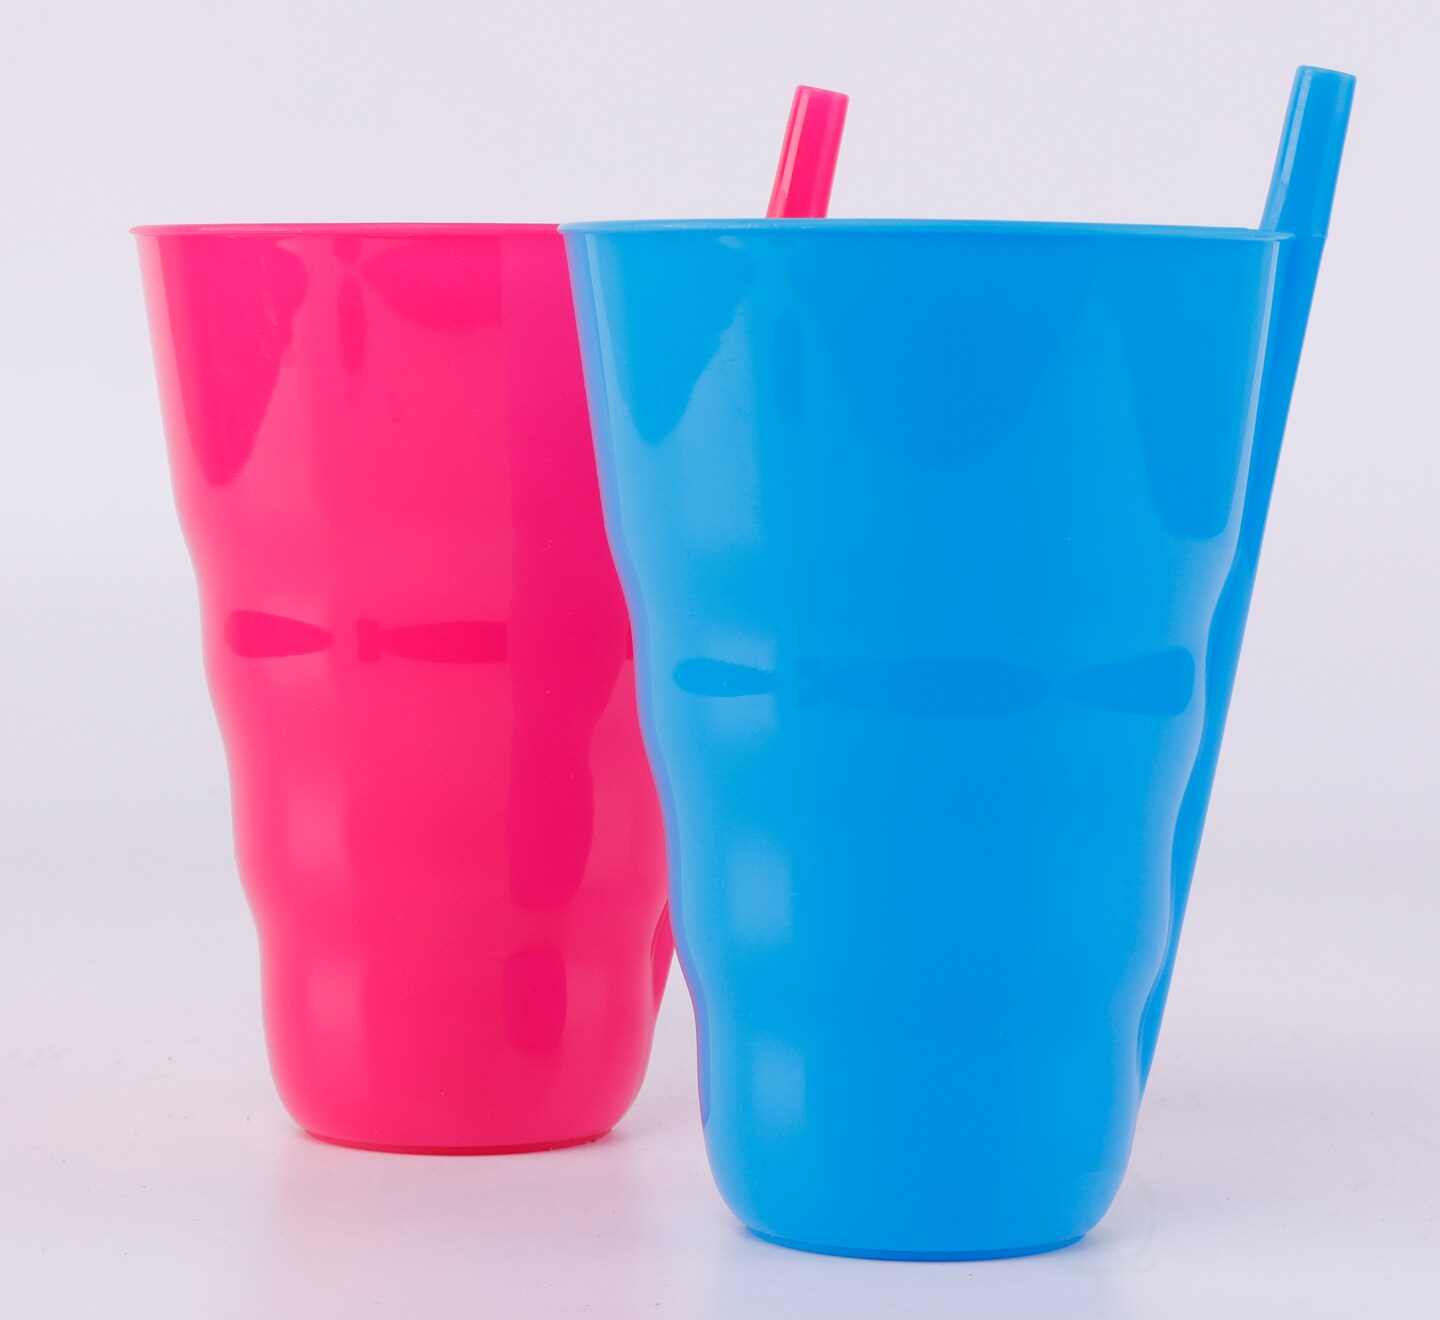 Reusable Plastic Cups with Straw